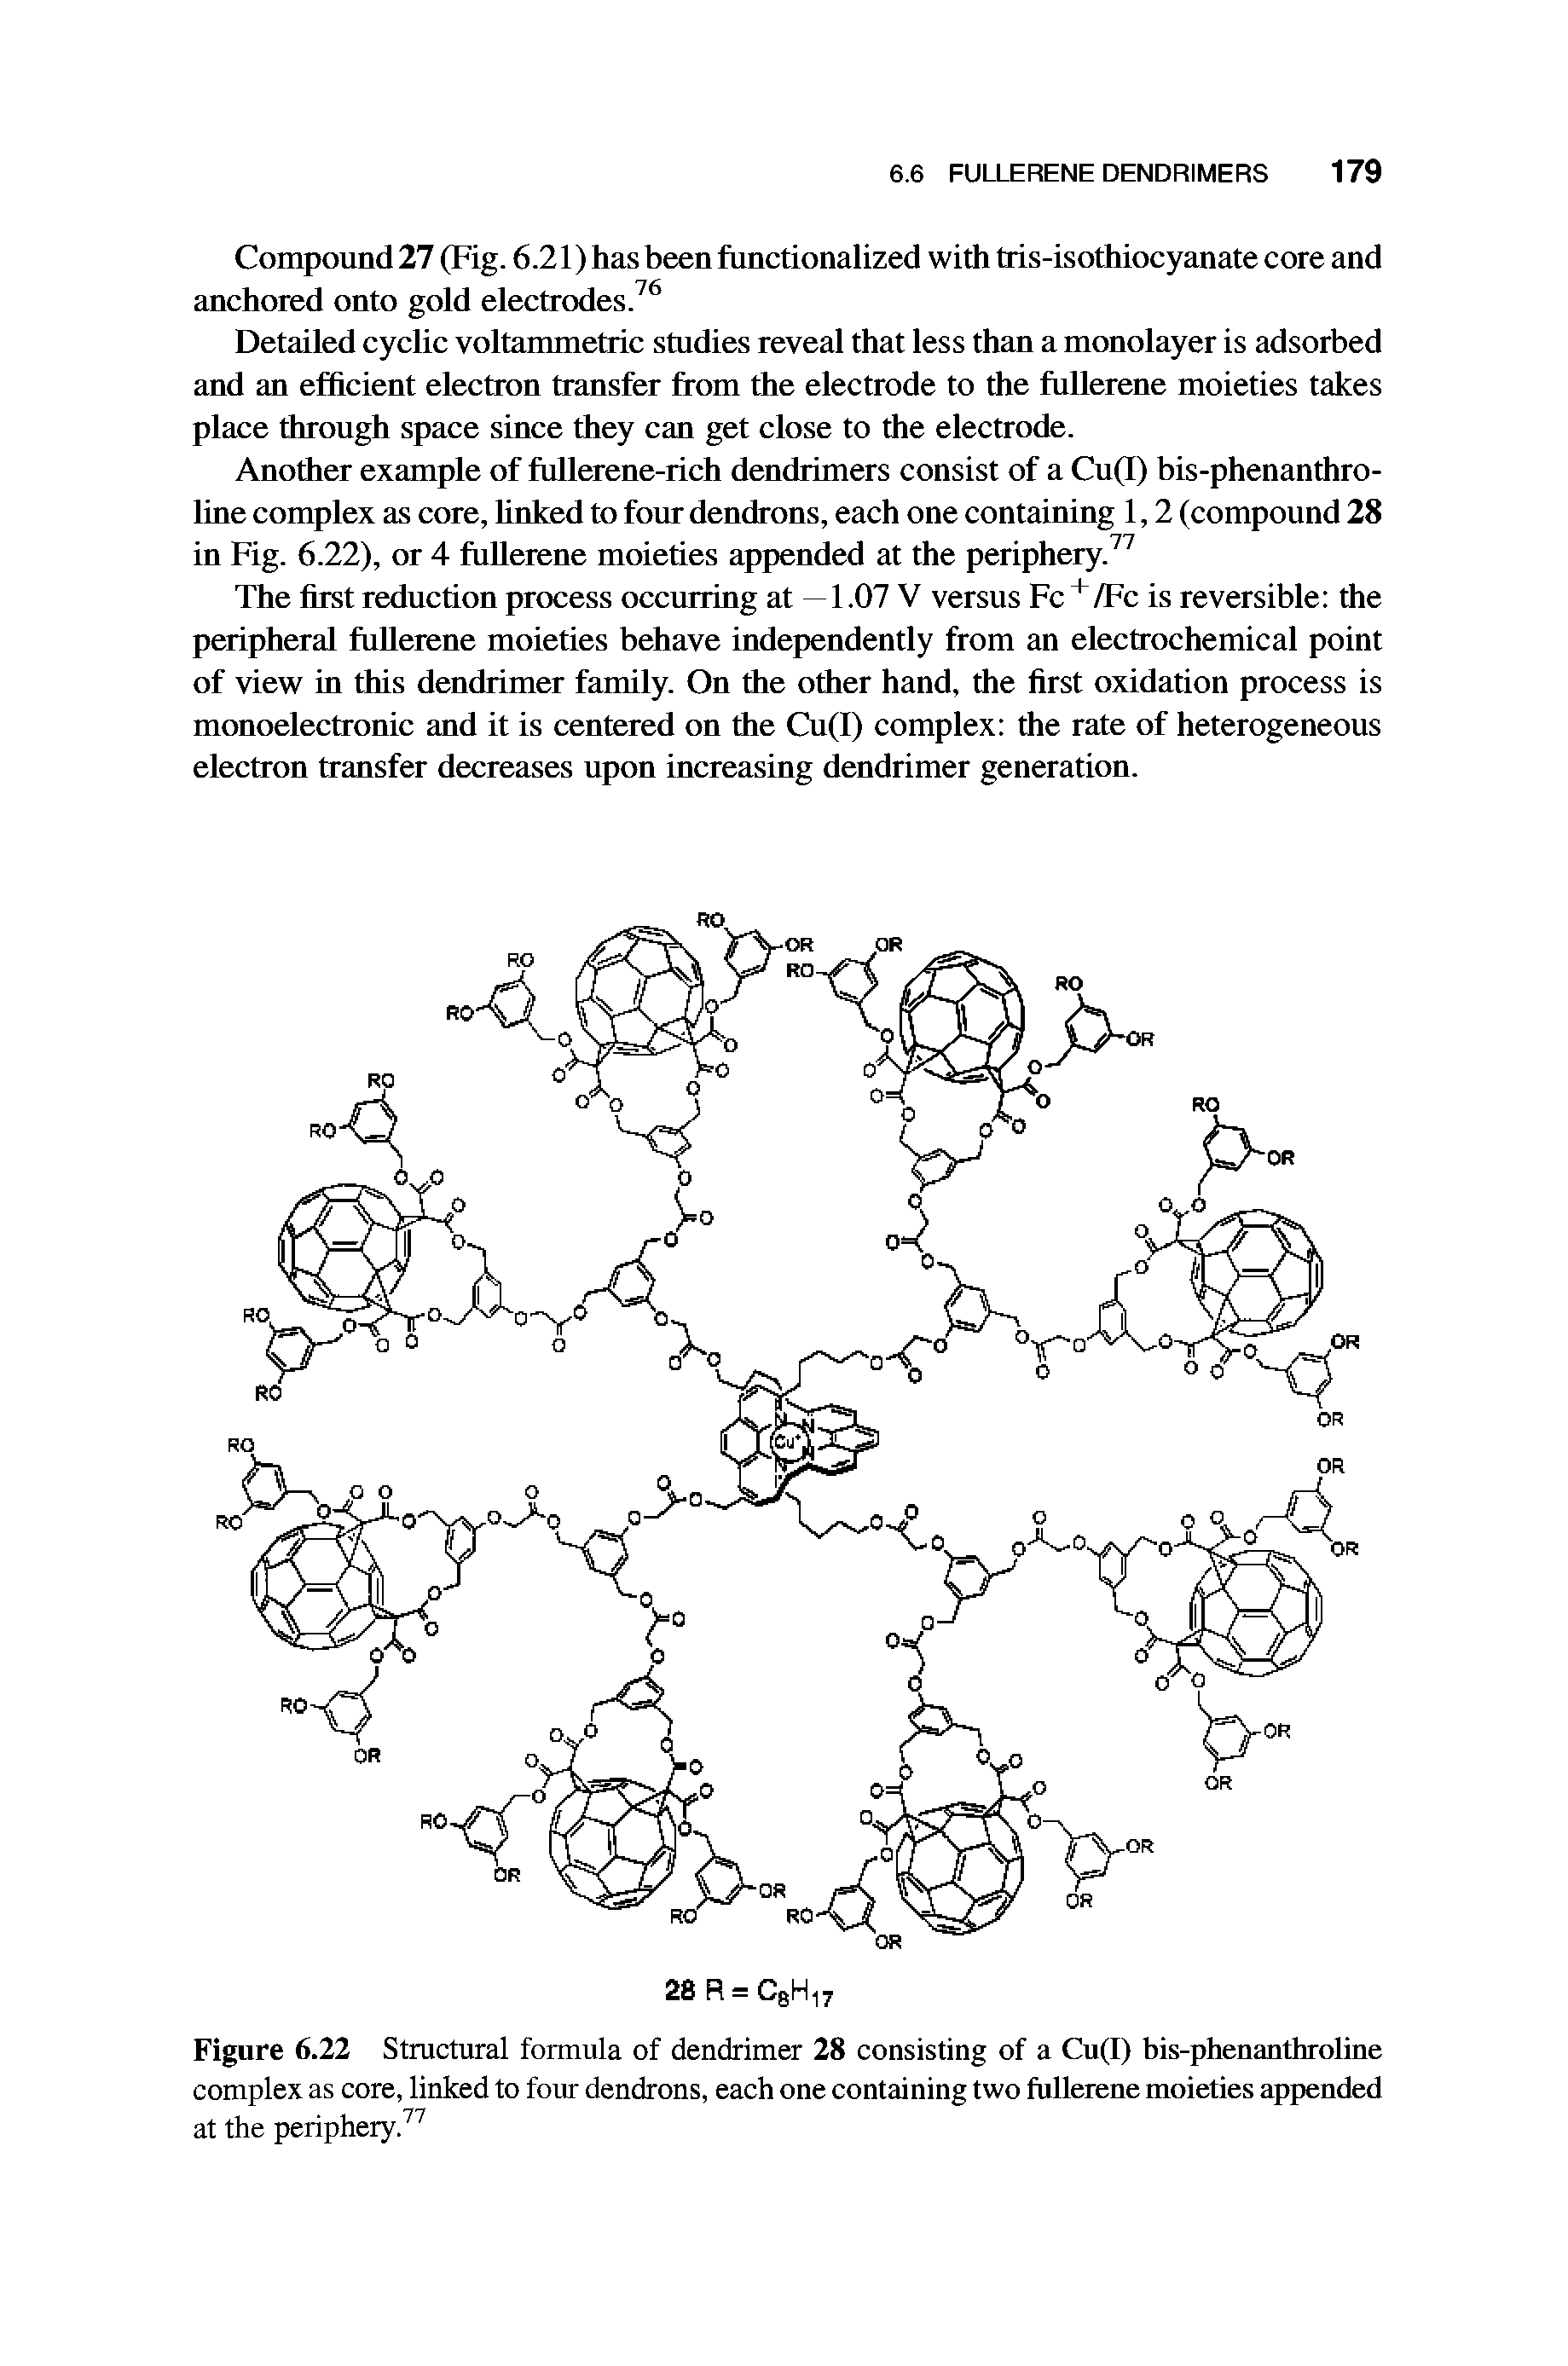 Figure 6.22 Stmctural formula of dendrimer 28 consisting of a Cu(I) bis-phenanthroline complex as core, linked to four dendrons, each one containing two fullerene moieties appended at the periphery.77...